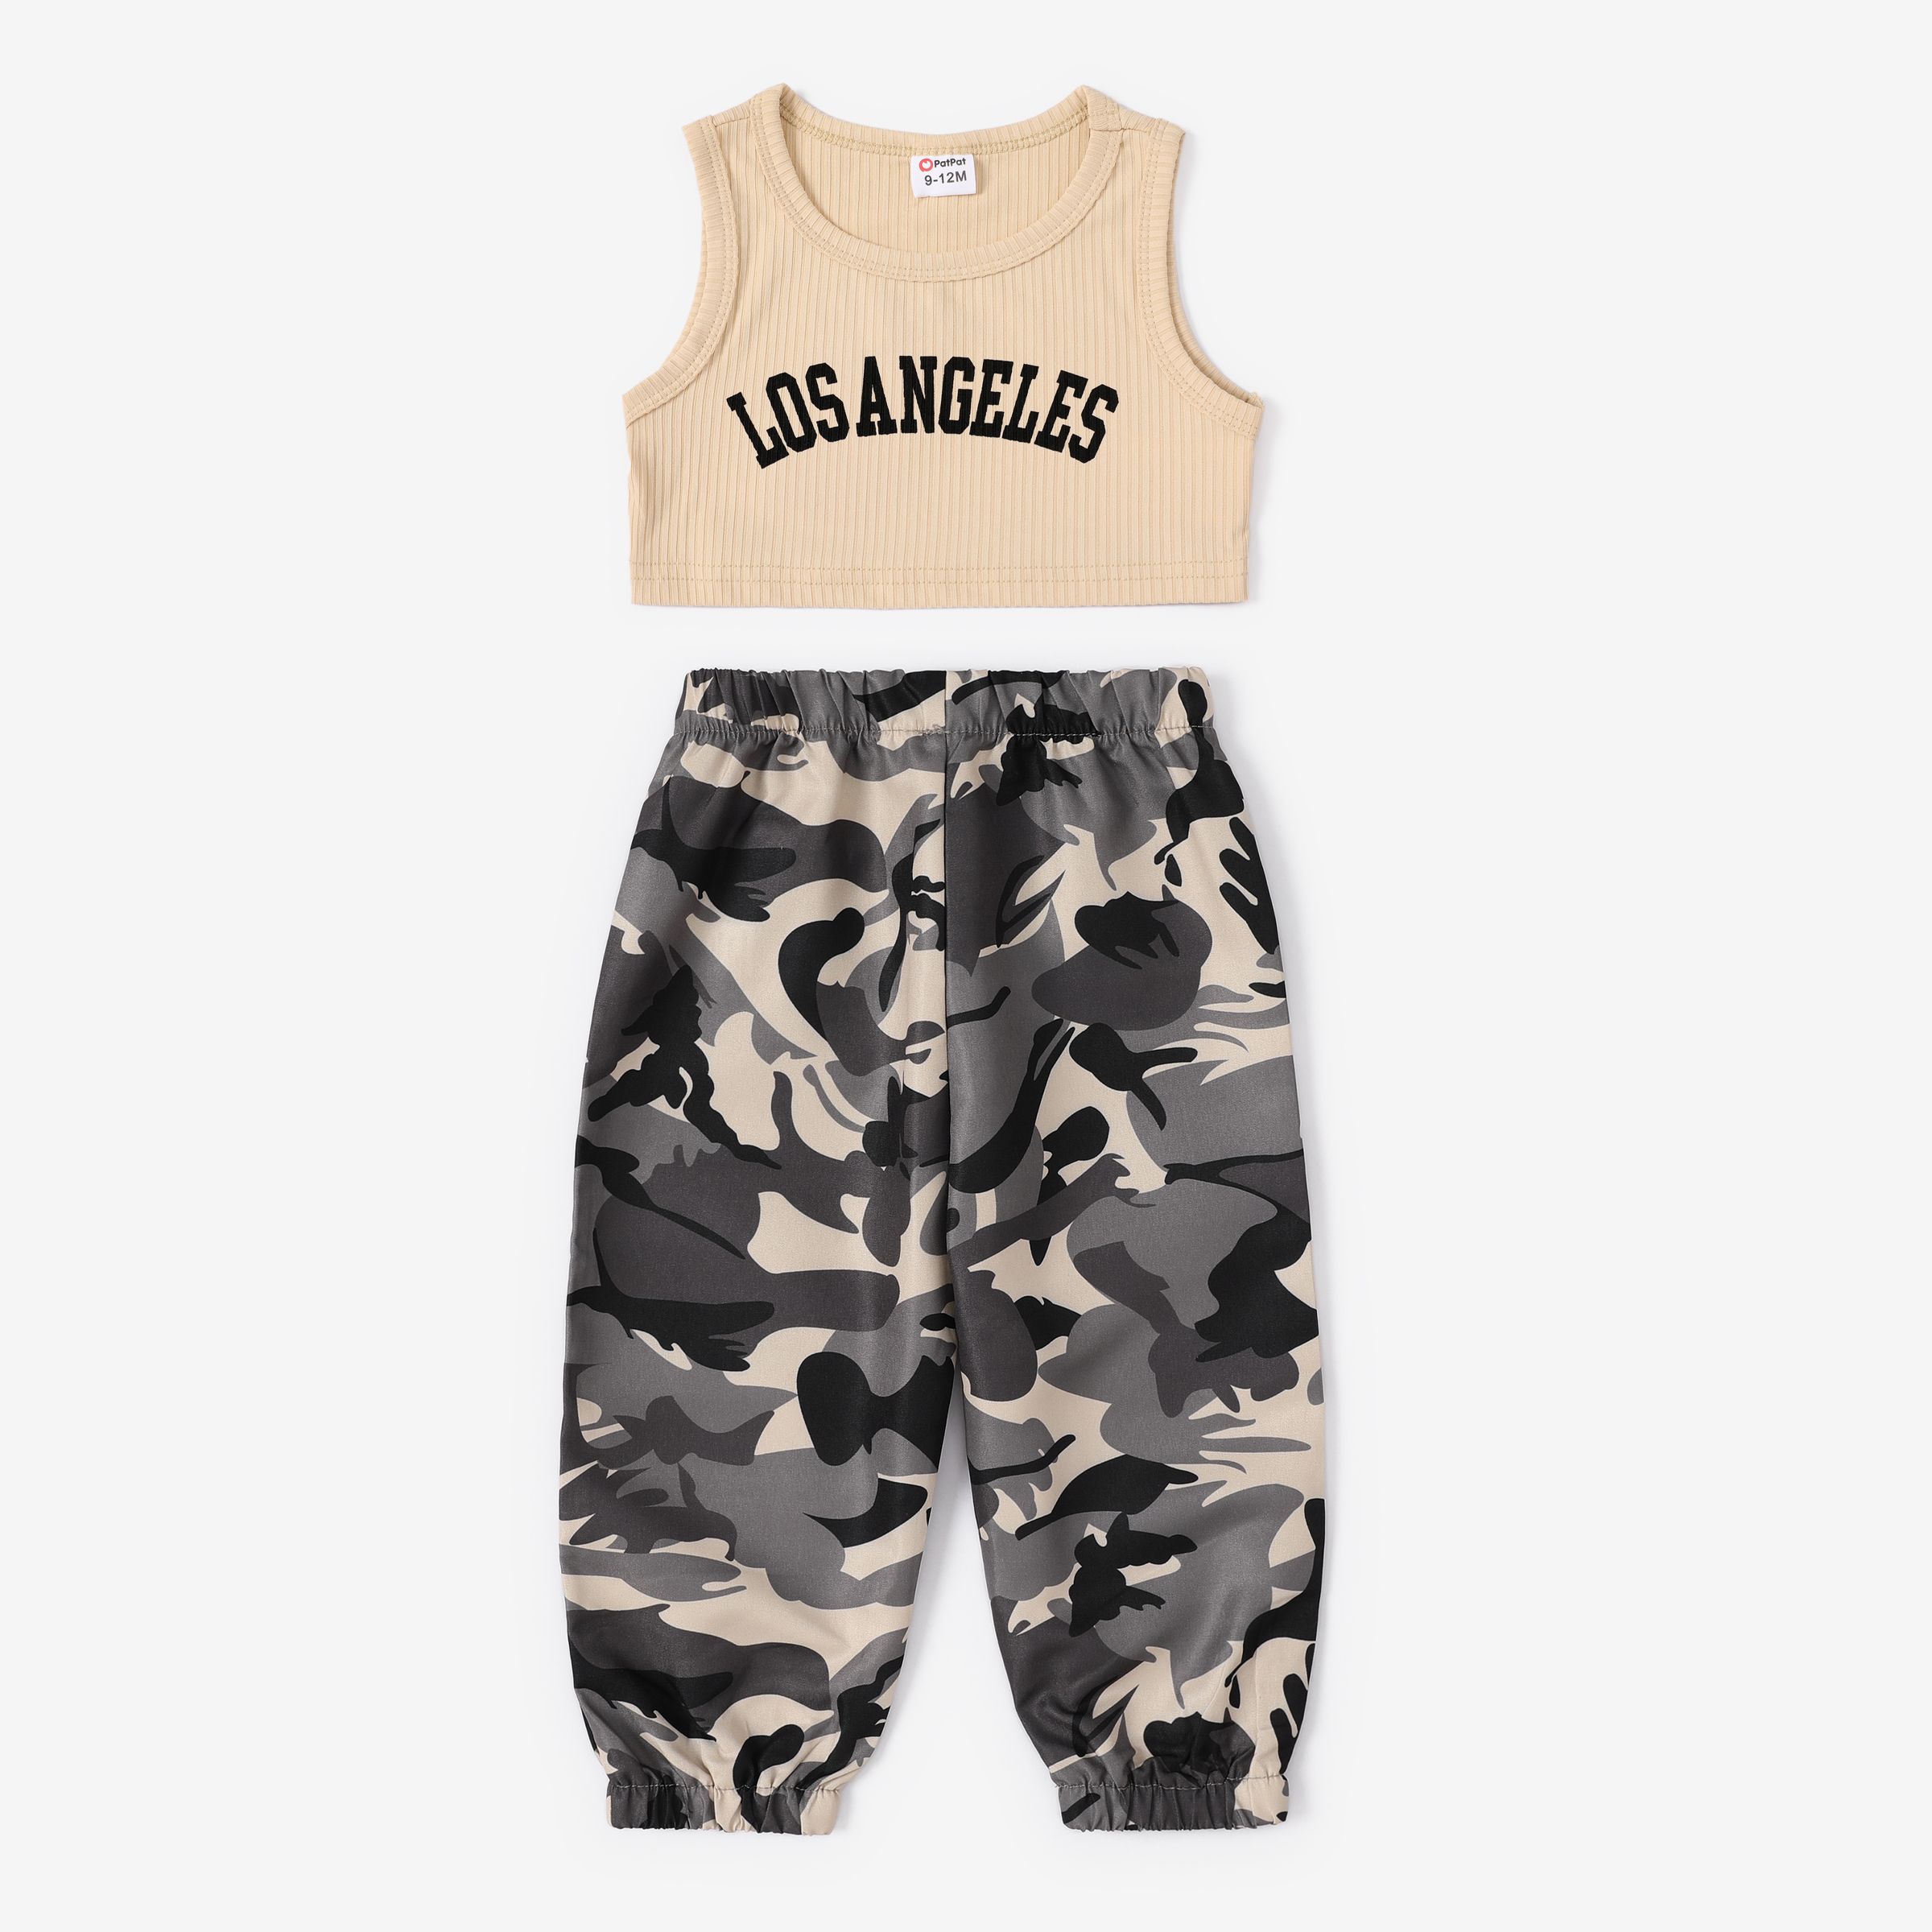 

2pcs Baby Girl's Camouflage Sport Sleeveless Top and Pants Set